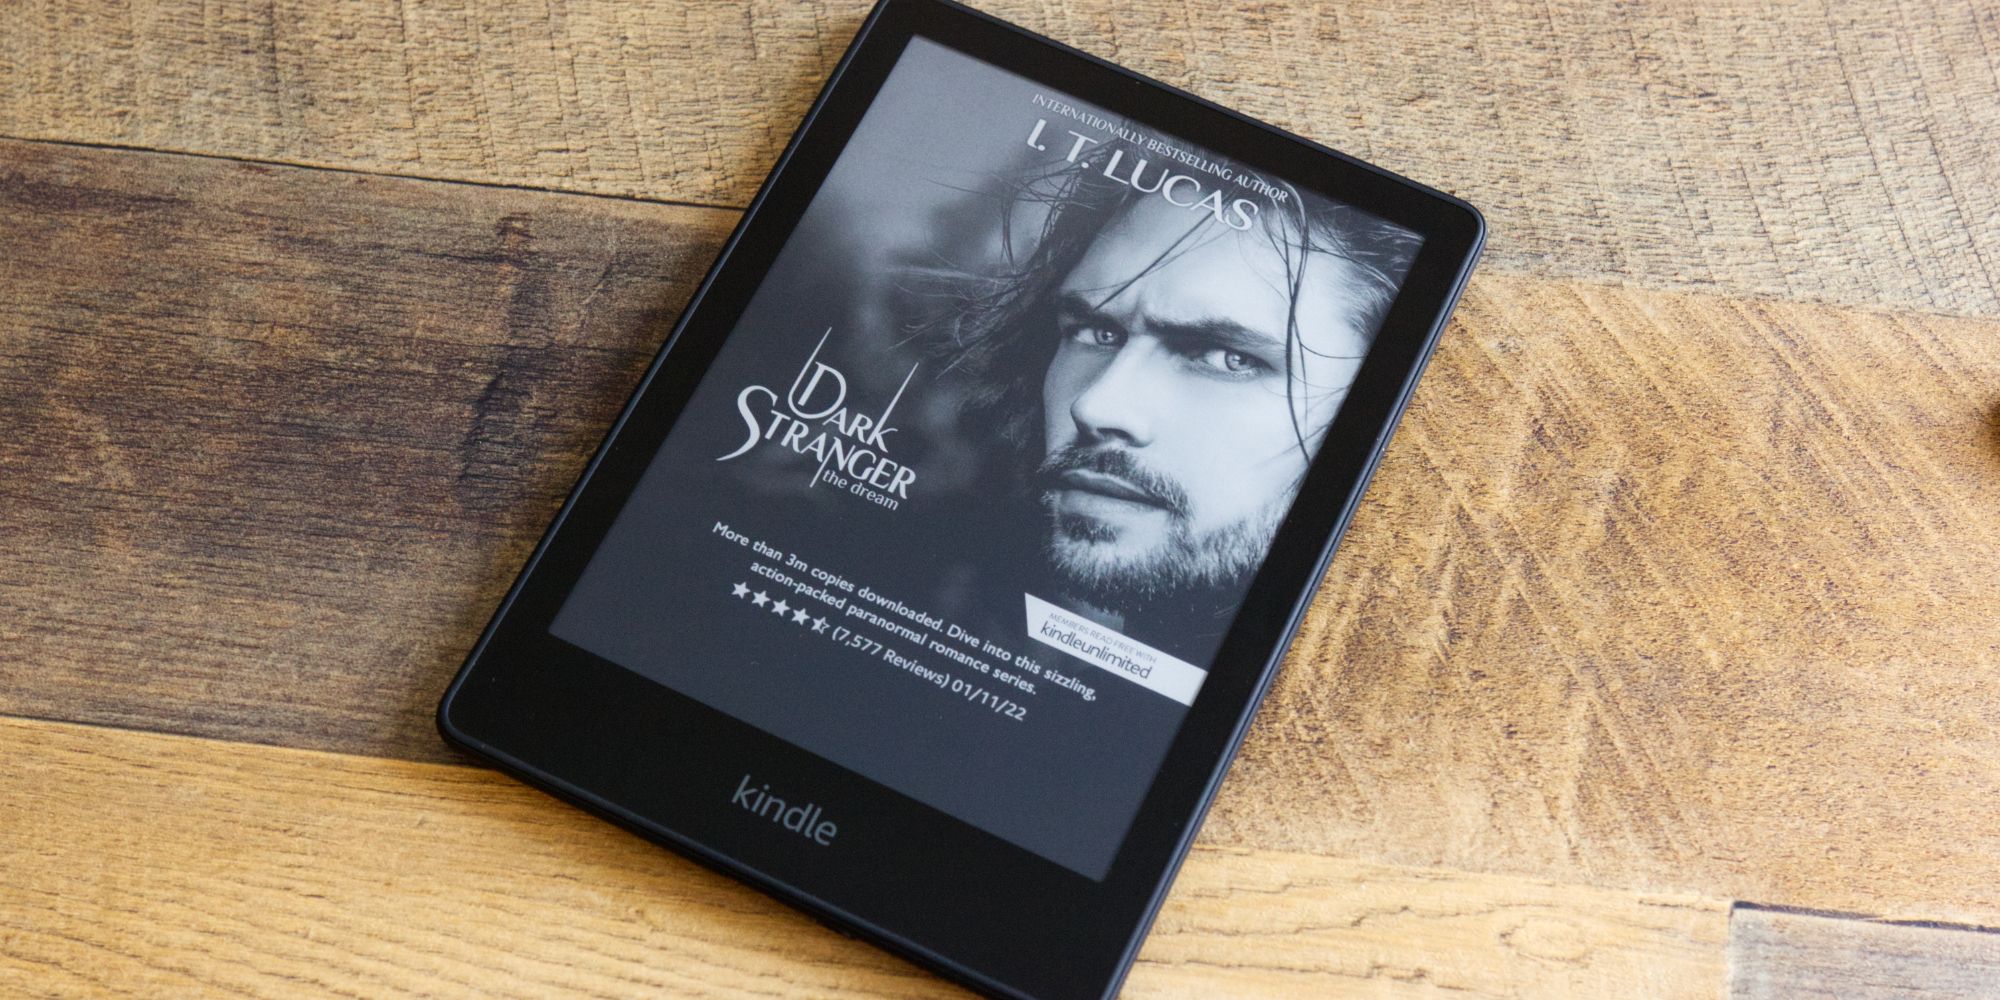 Kindle Voyage 7th Generation eBook Readers for sale